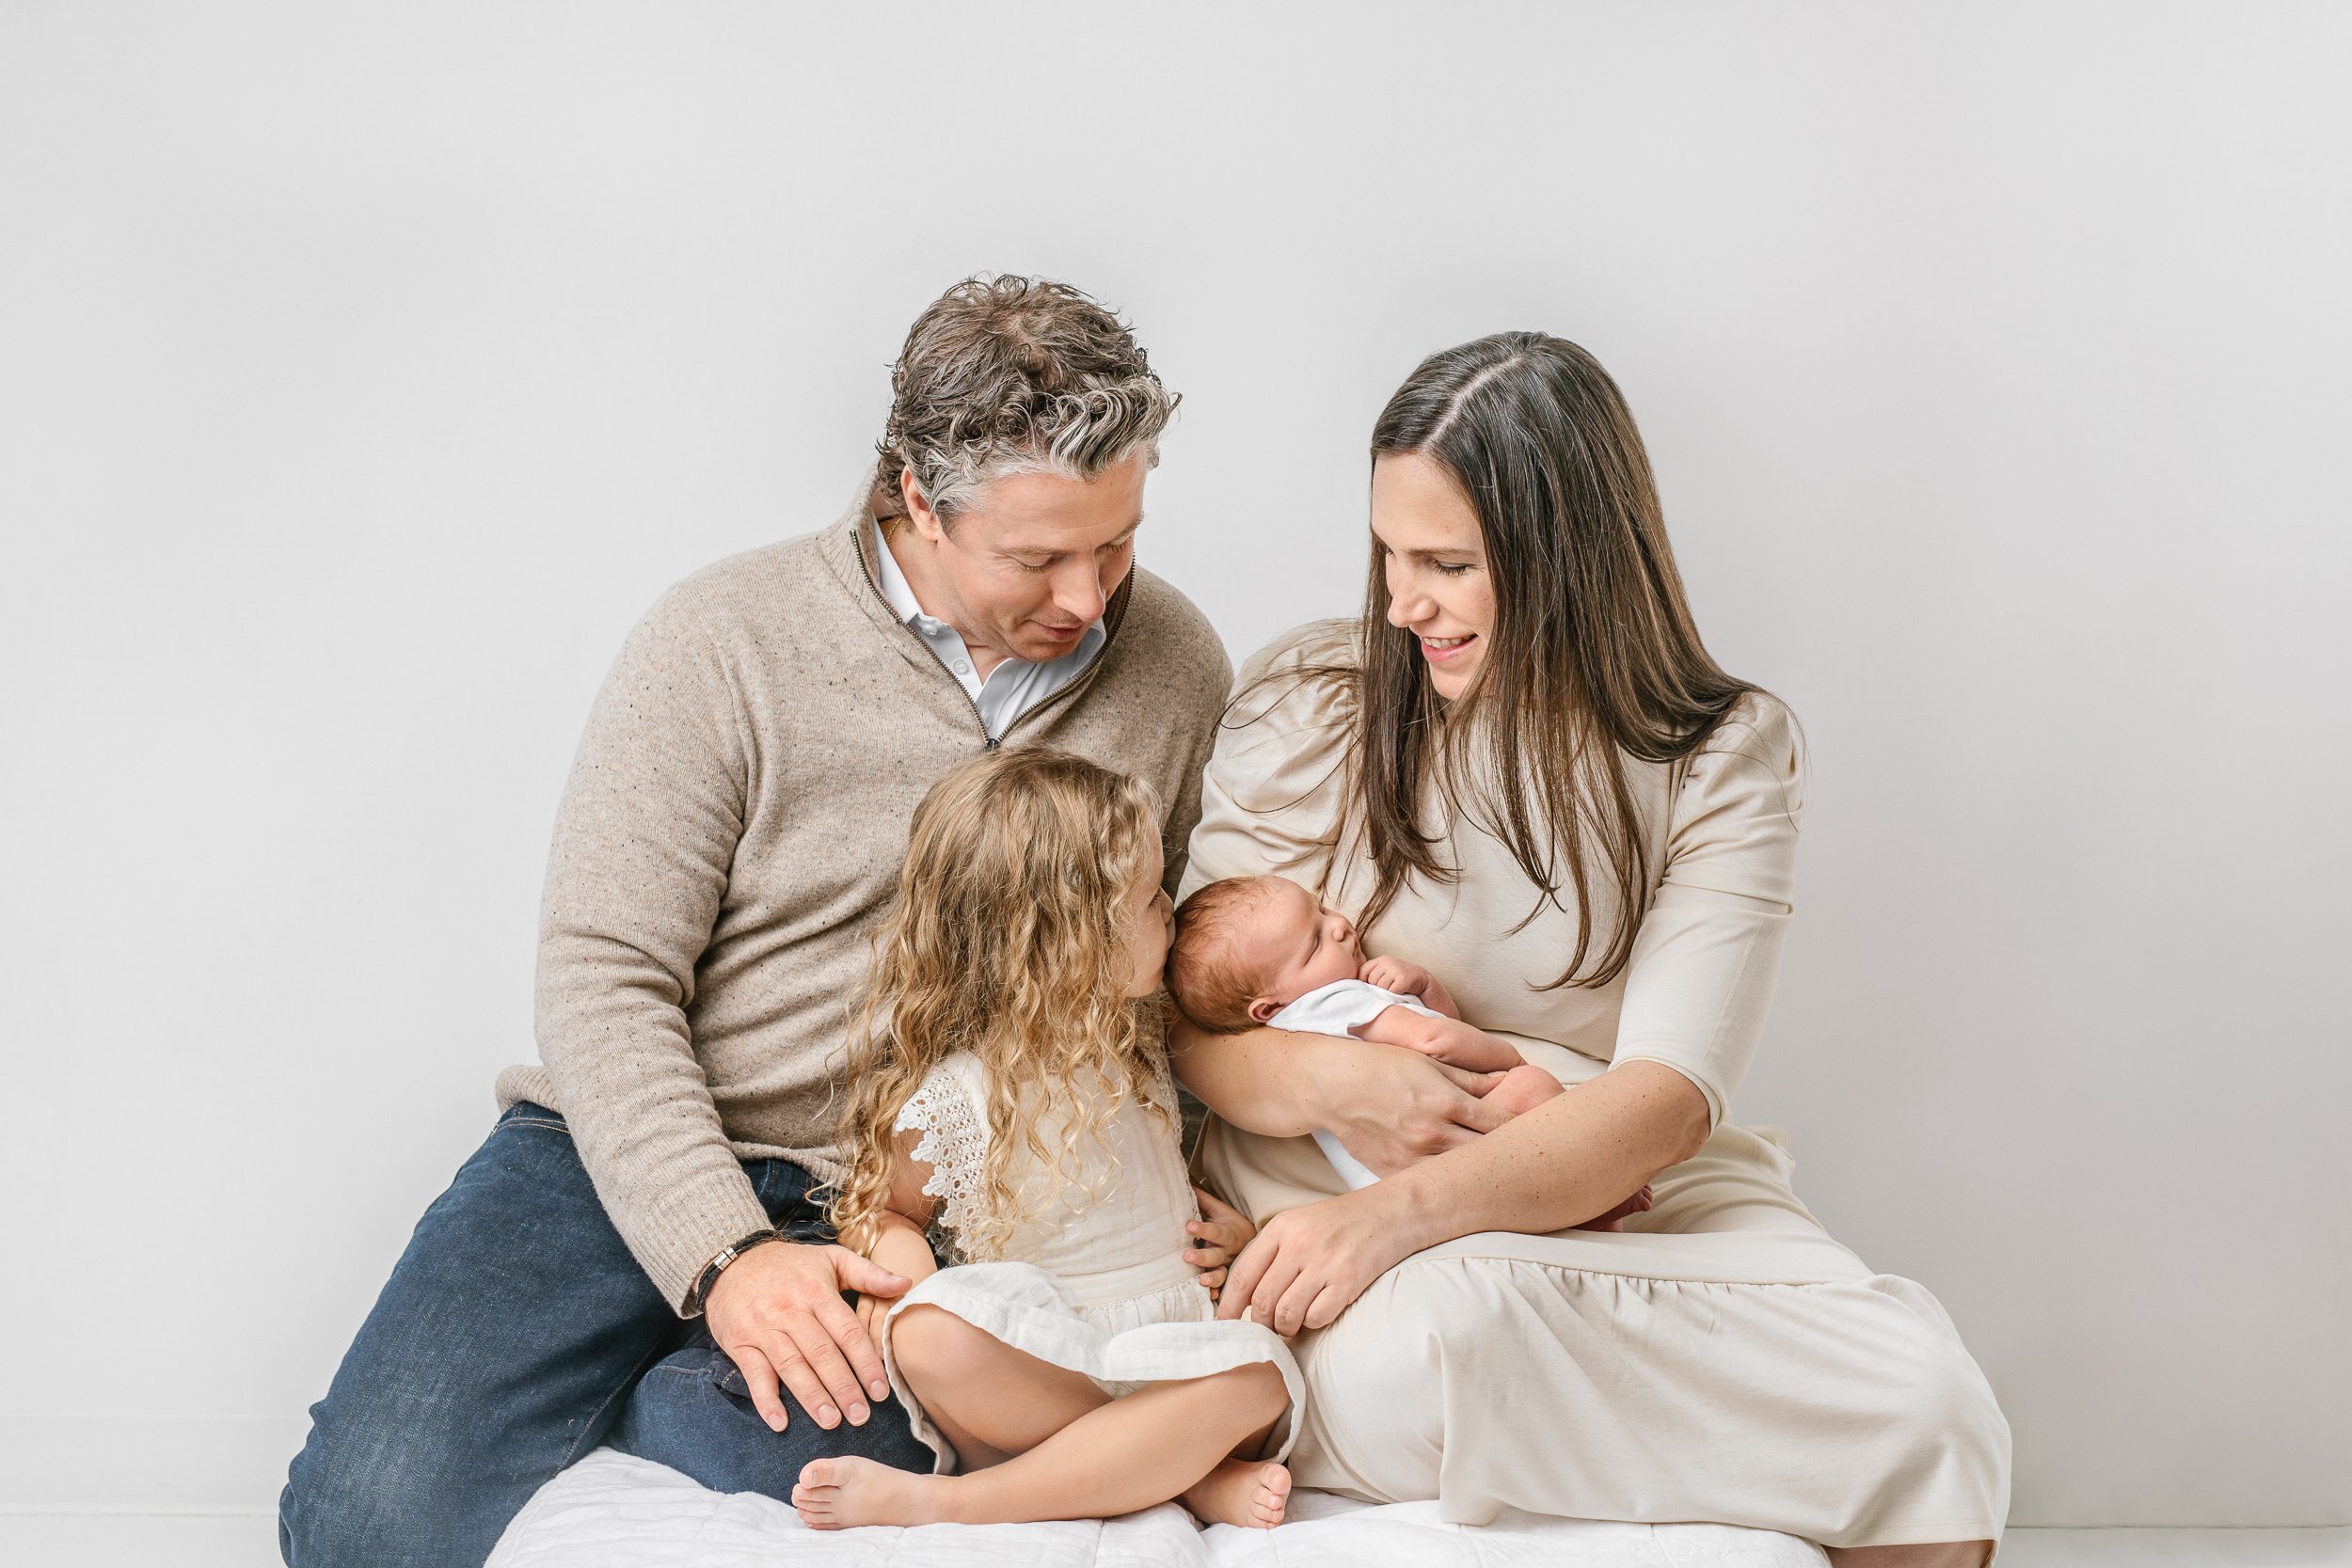  A new family of four all smile down at the new baby in the mother's arms in New Jersey during a studio session with Nicole Hawkins Photography. newborn family sessions new family of four mother with two little girls #nicolehawkinsphotography #nicole